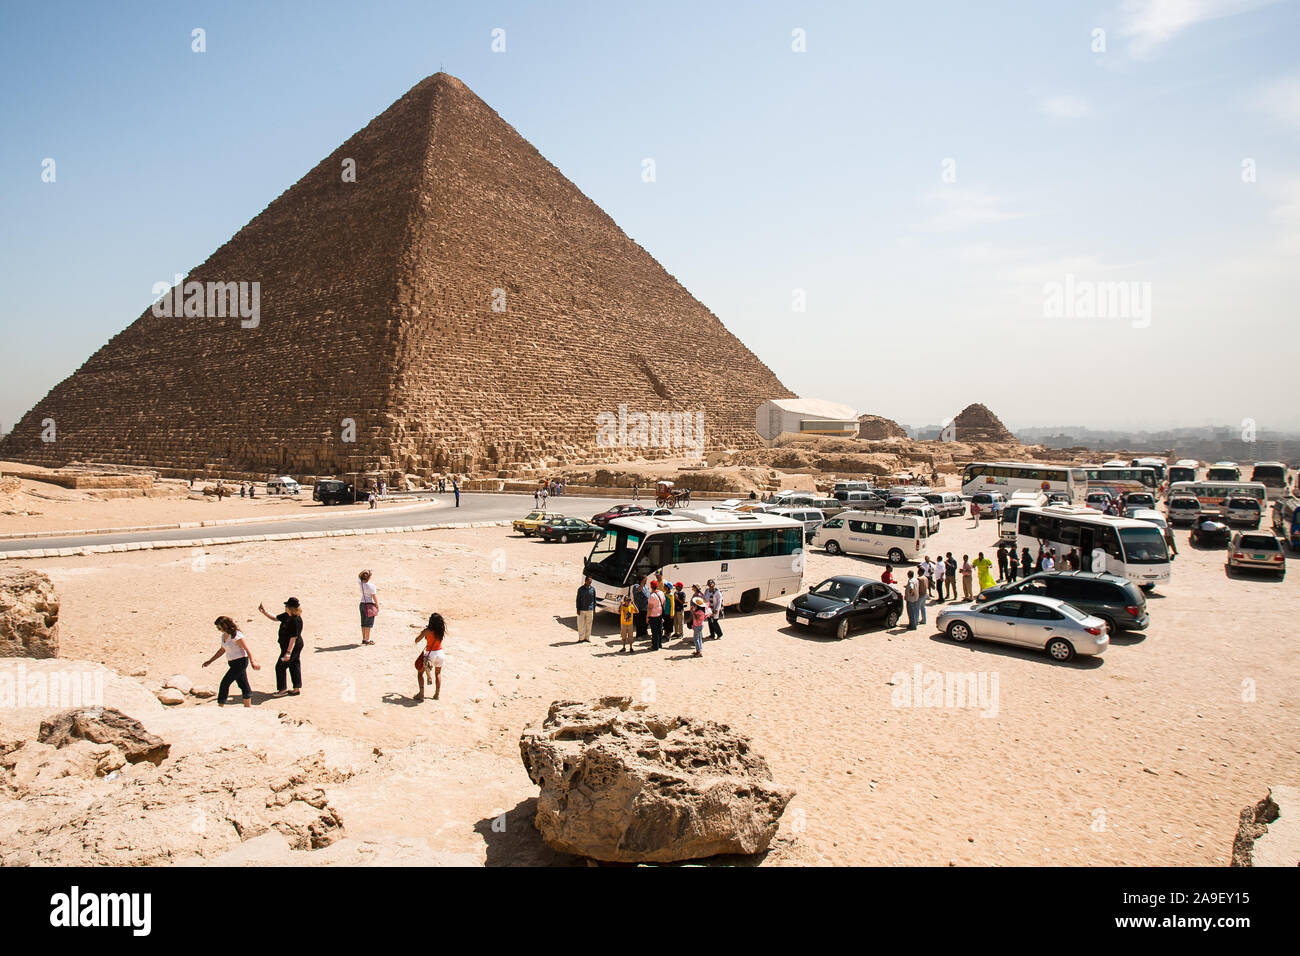 Giza, Cairo, Egypt, May 2, 2008: The Pyramid of Khufu (The Great Pyramid of Giza) towers over tourists and a full parking lot on the Giza plateau. Stock Photo